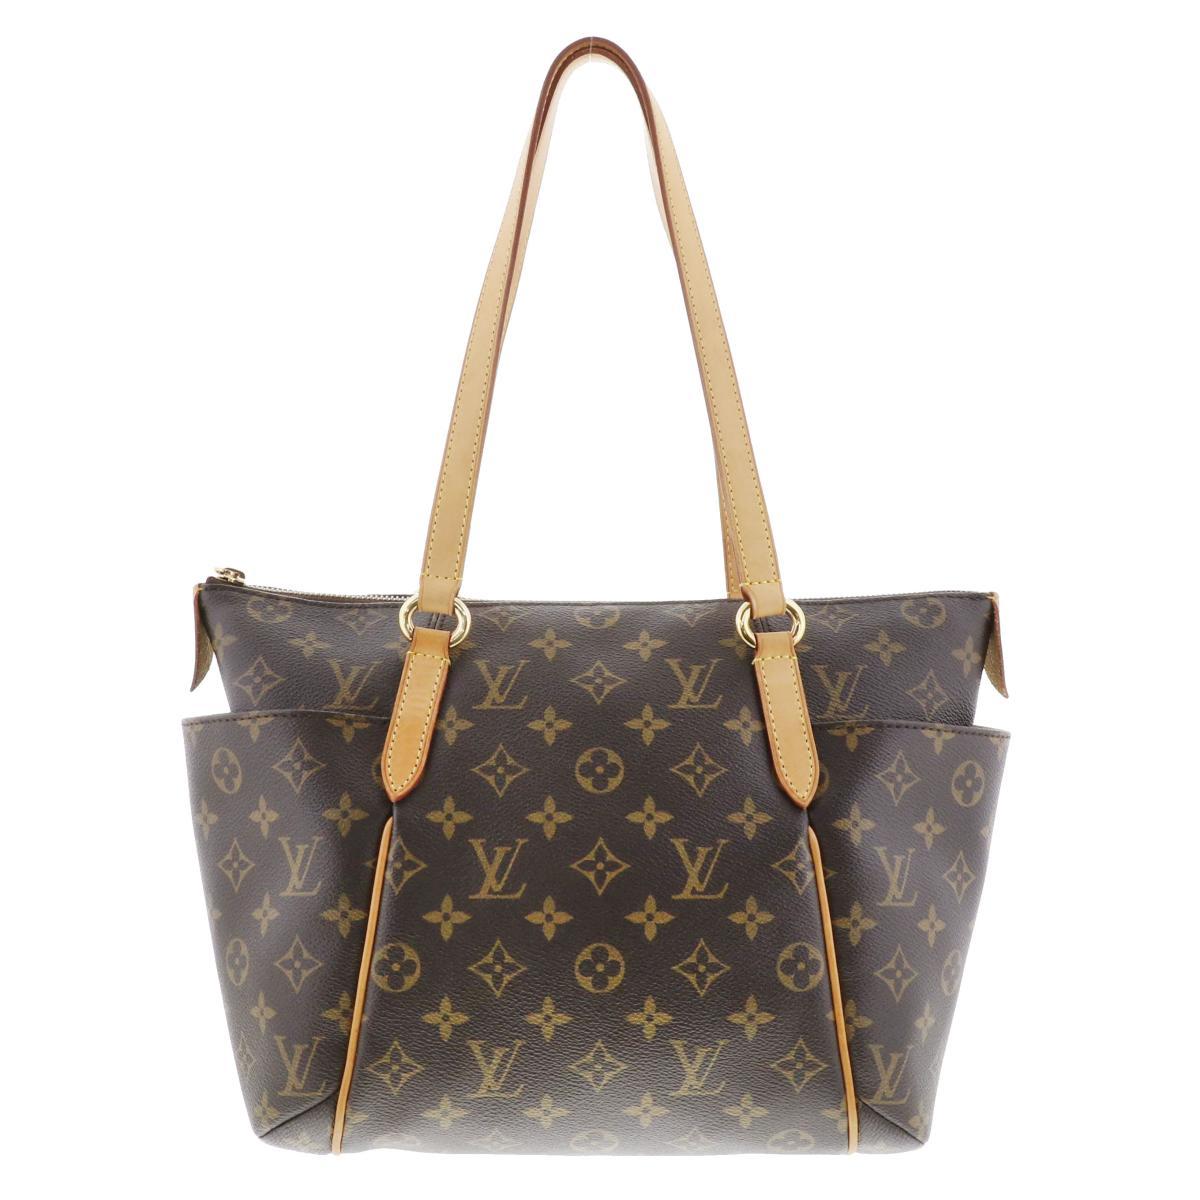 LOUIS VUITTON ルイヴィトン バッグ トートバッグ M56688 モノグラム canvas/Leather トータリーPM